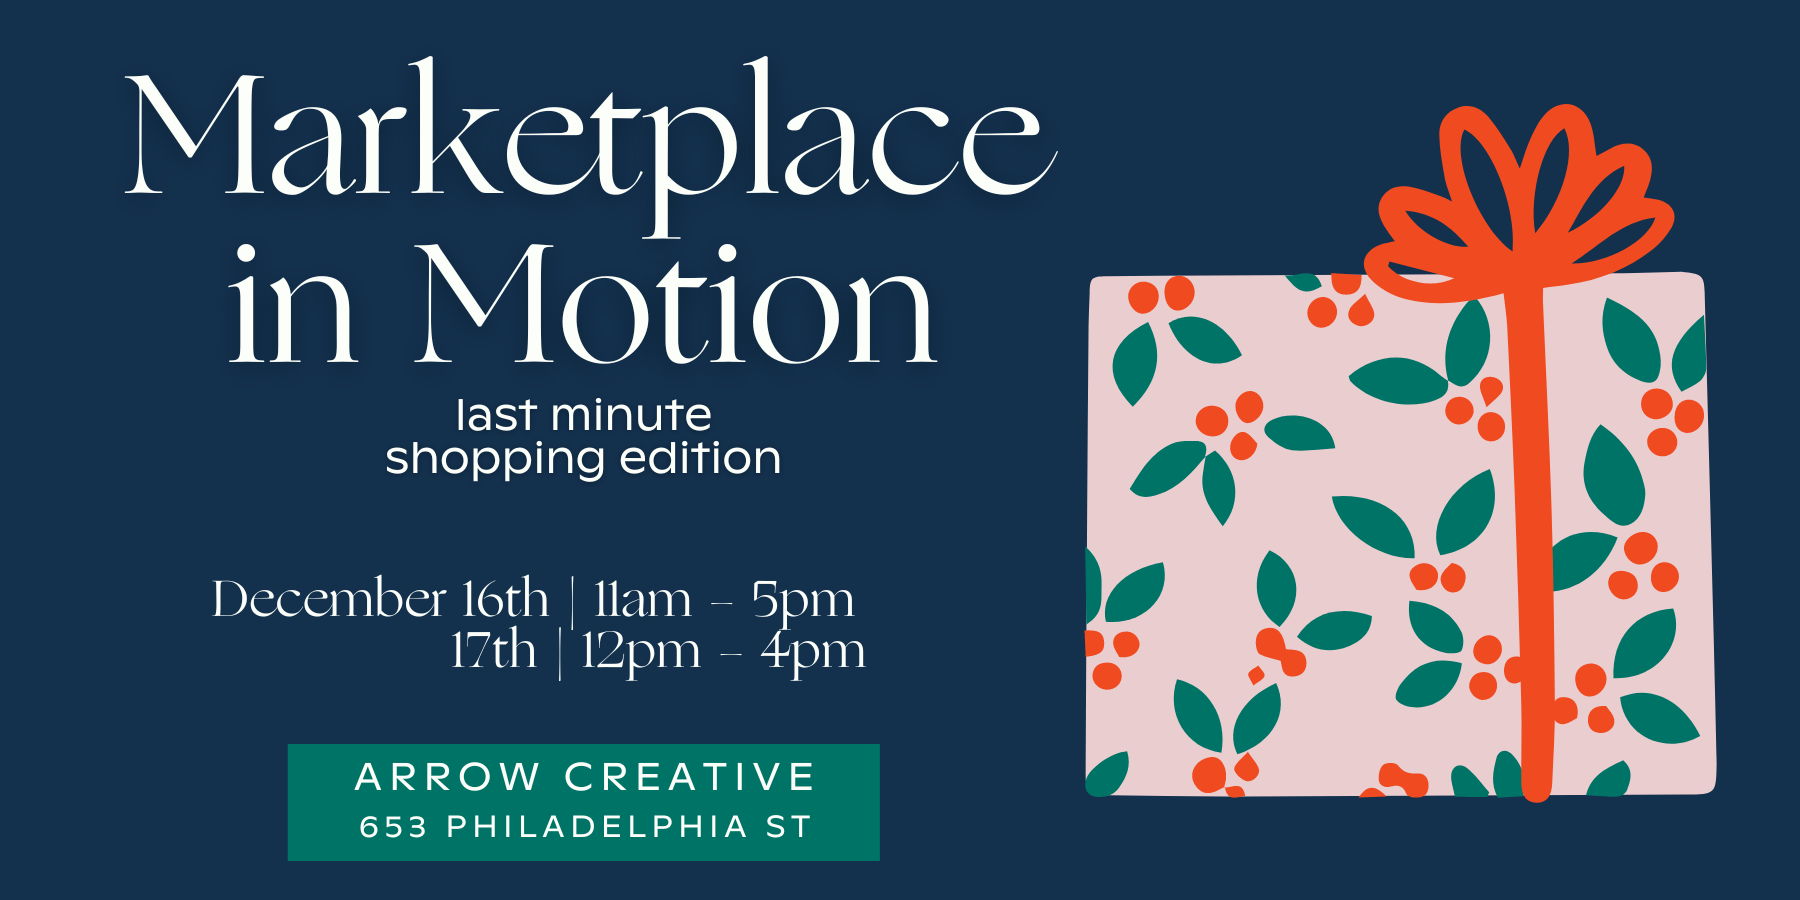 Marketplace in Motion: Last Minute Shopping Edition promotional image